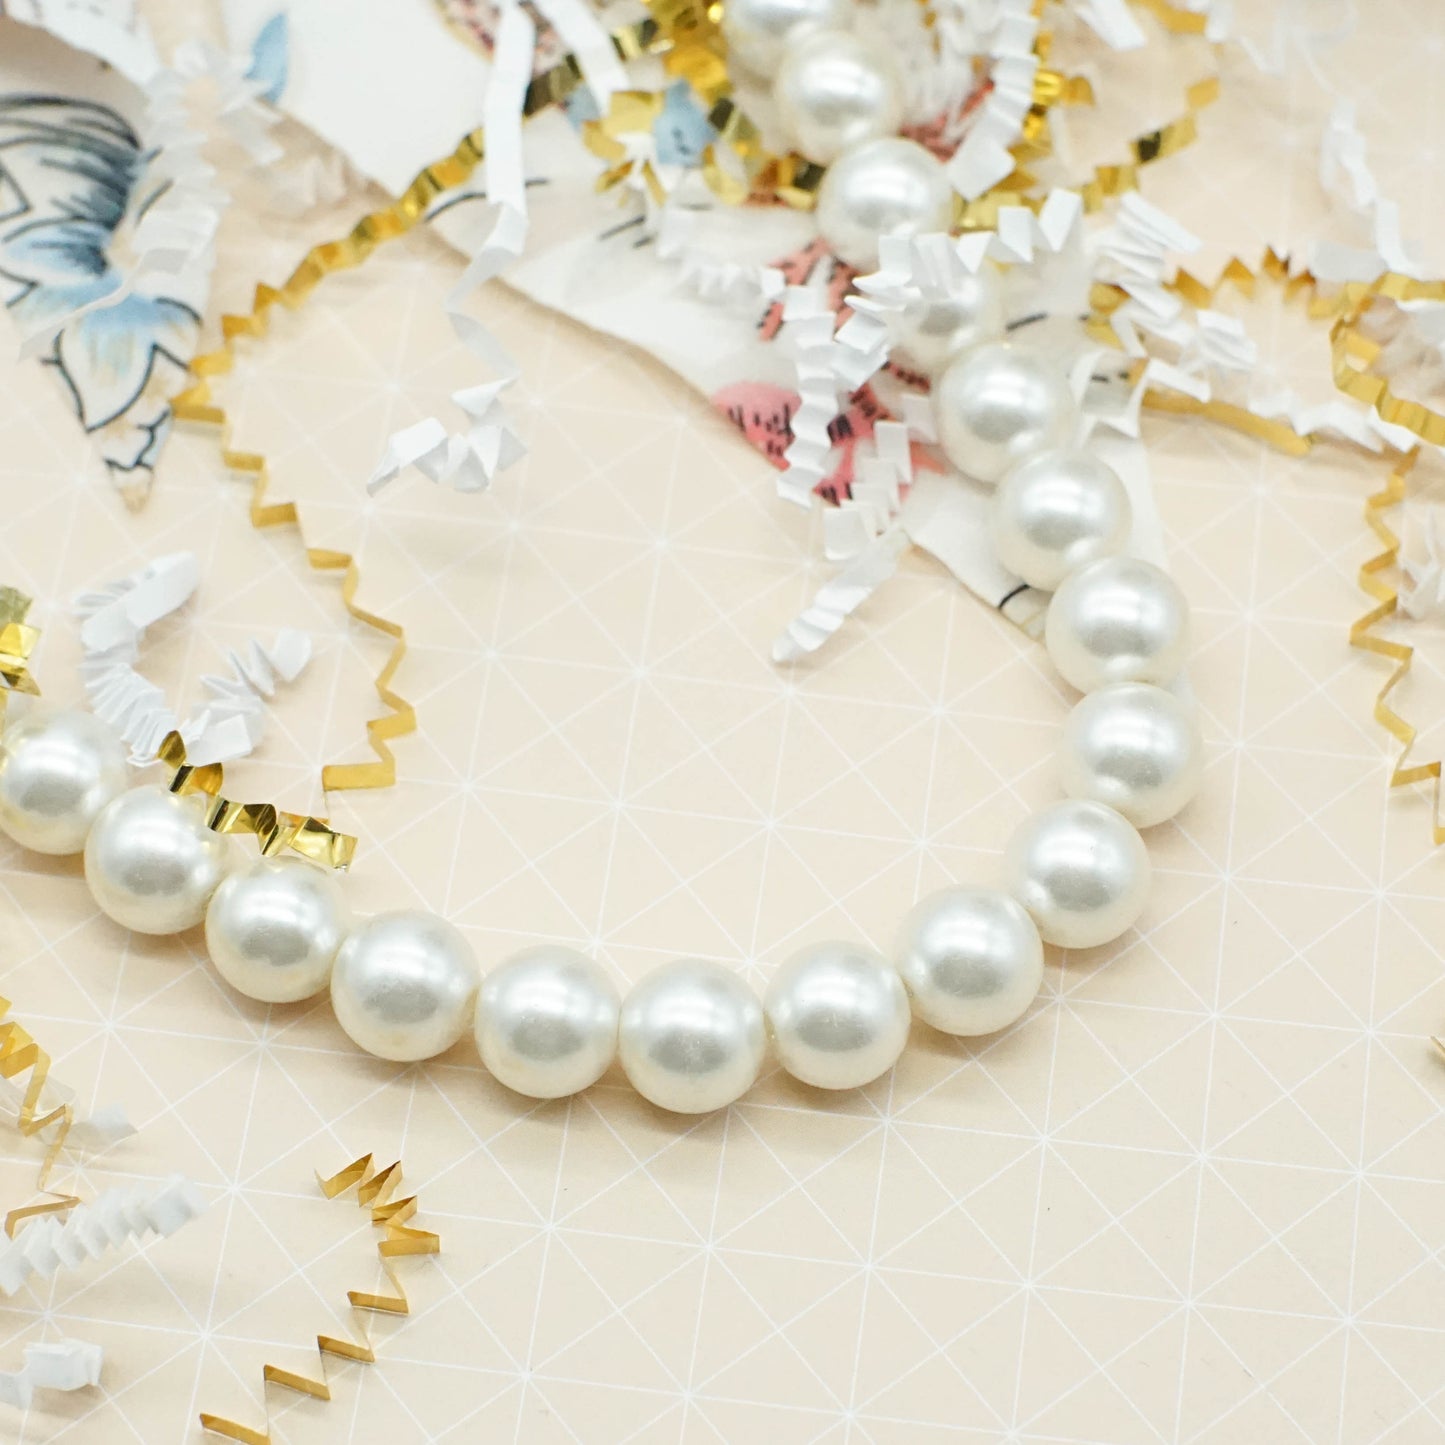 Jumbo Pearl Necklace - THE MUST PEARL NECKLACE